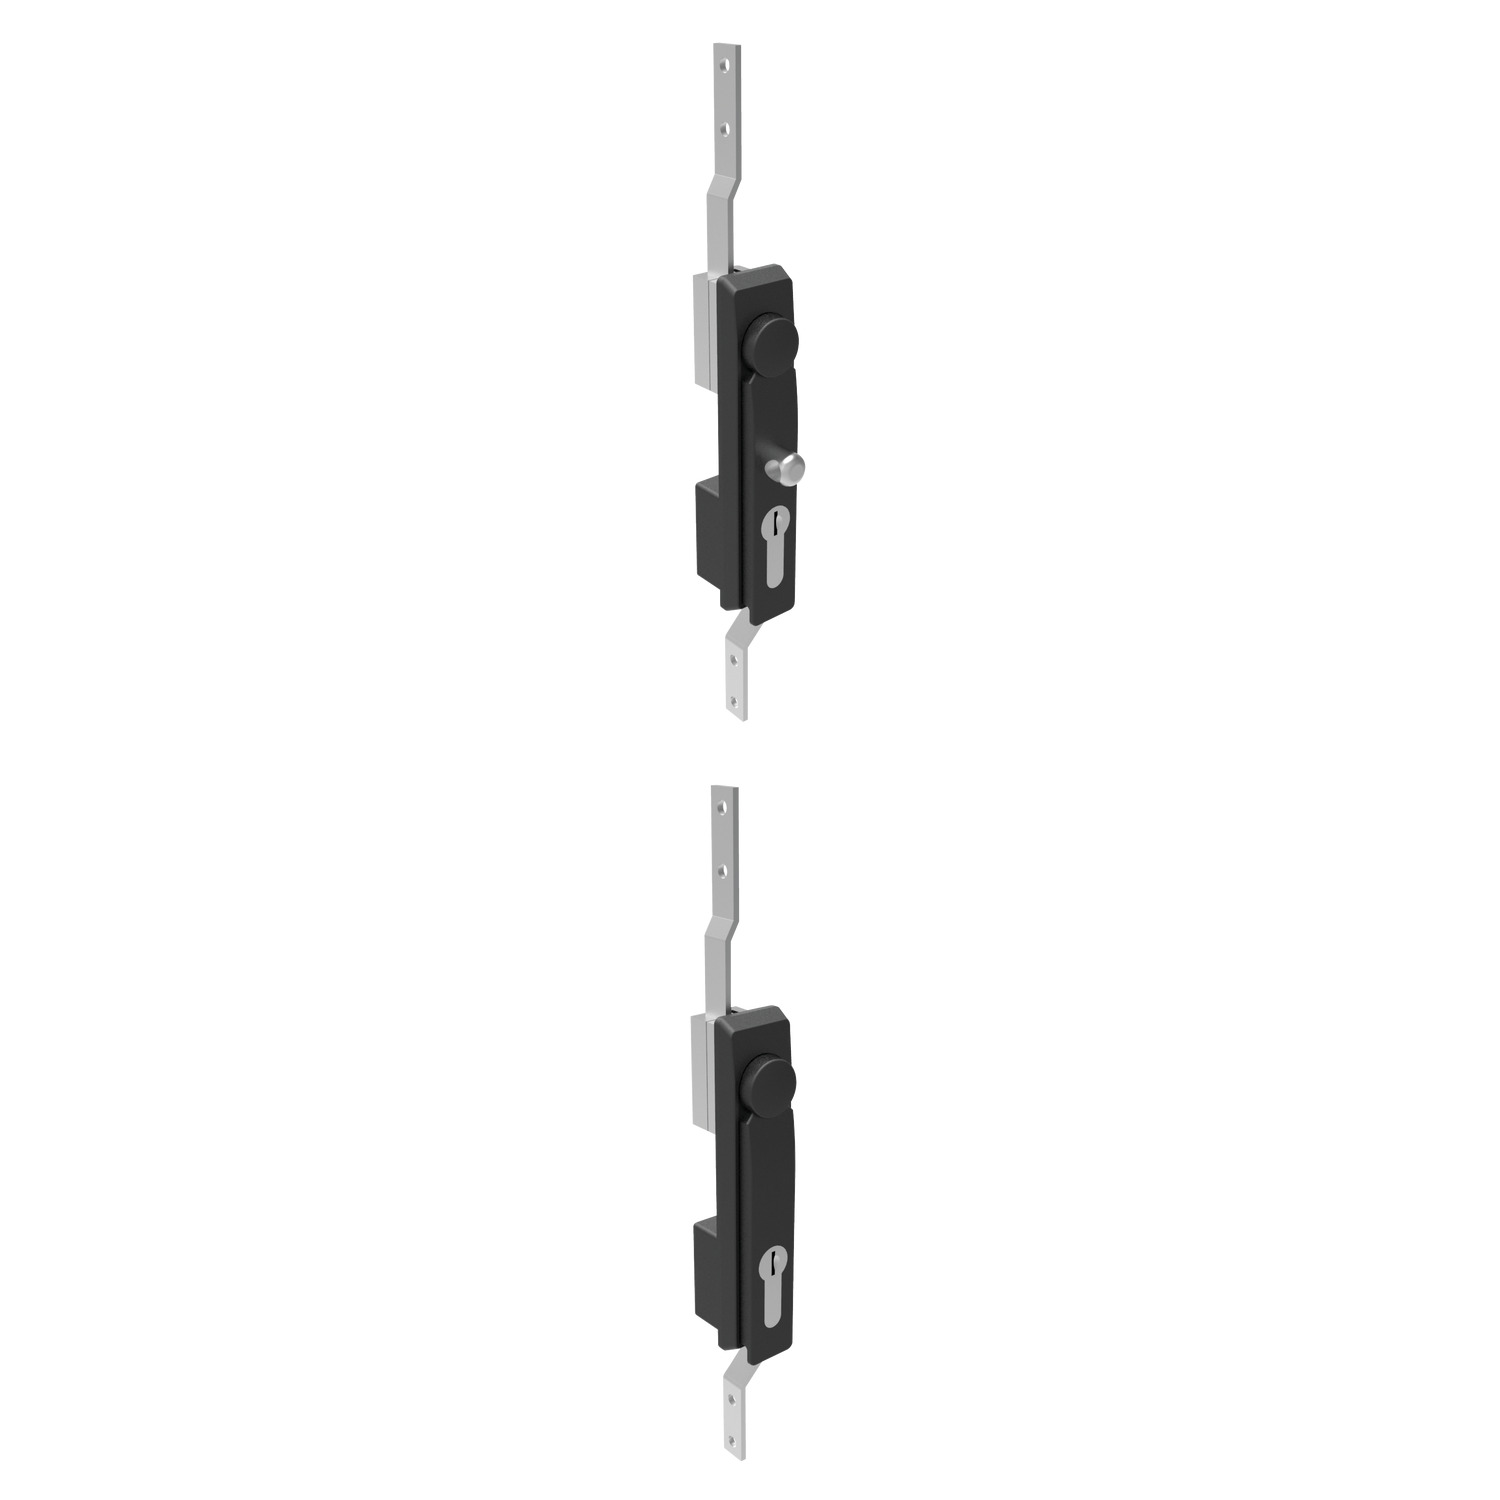 B2088.AW0020 Swing Handles with 3 point latching rod control